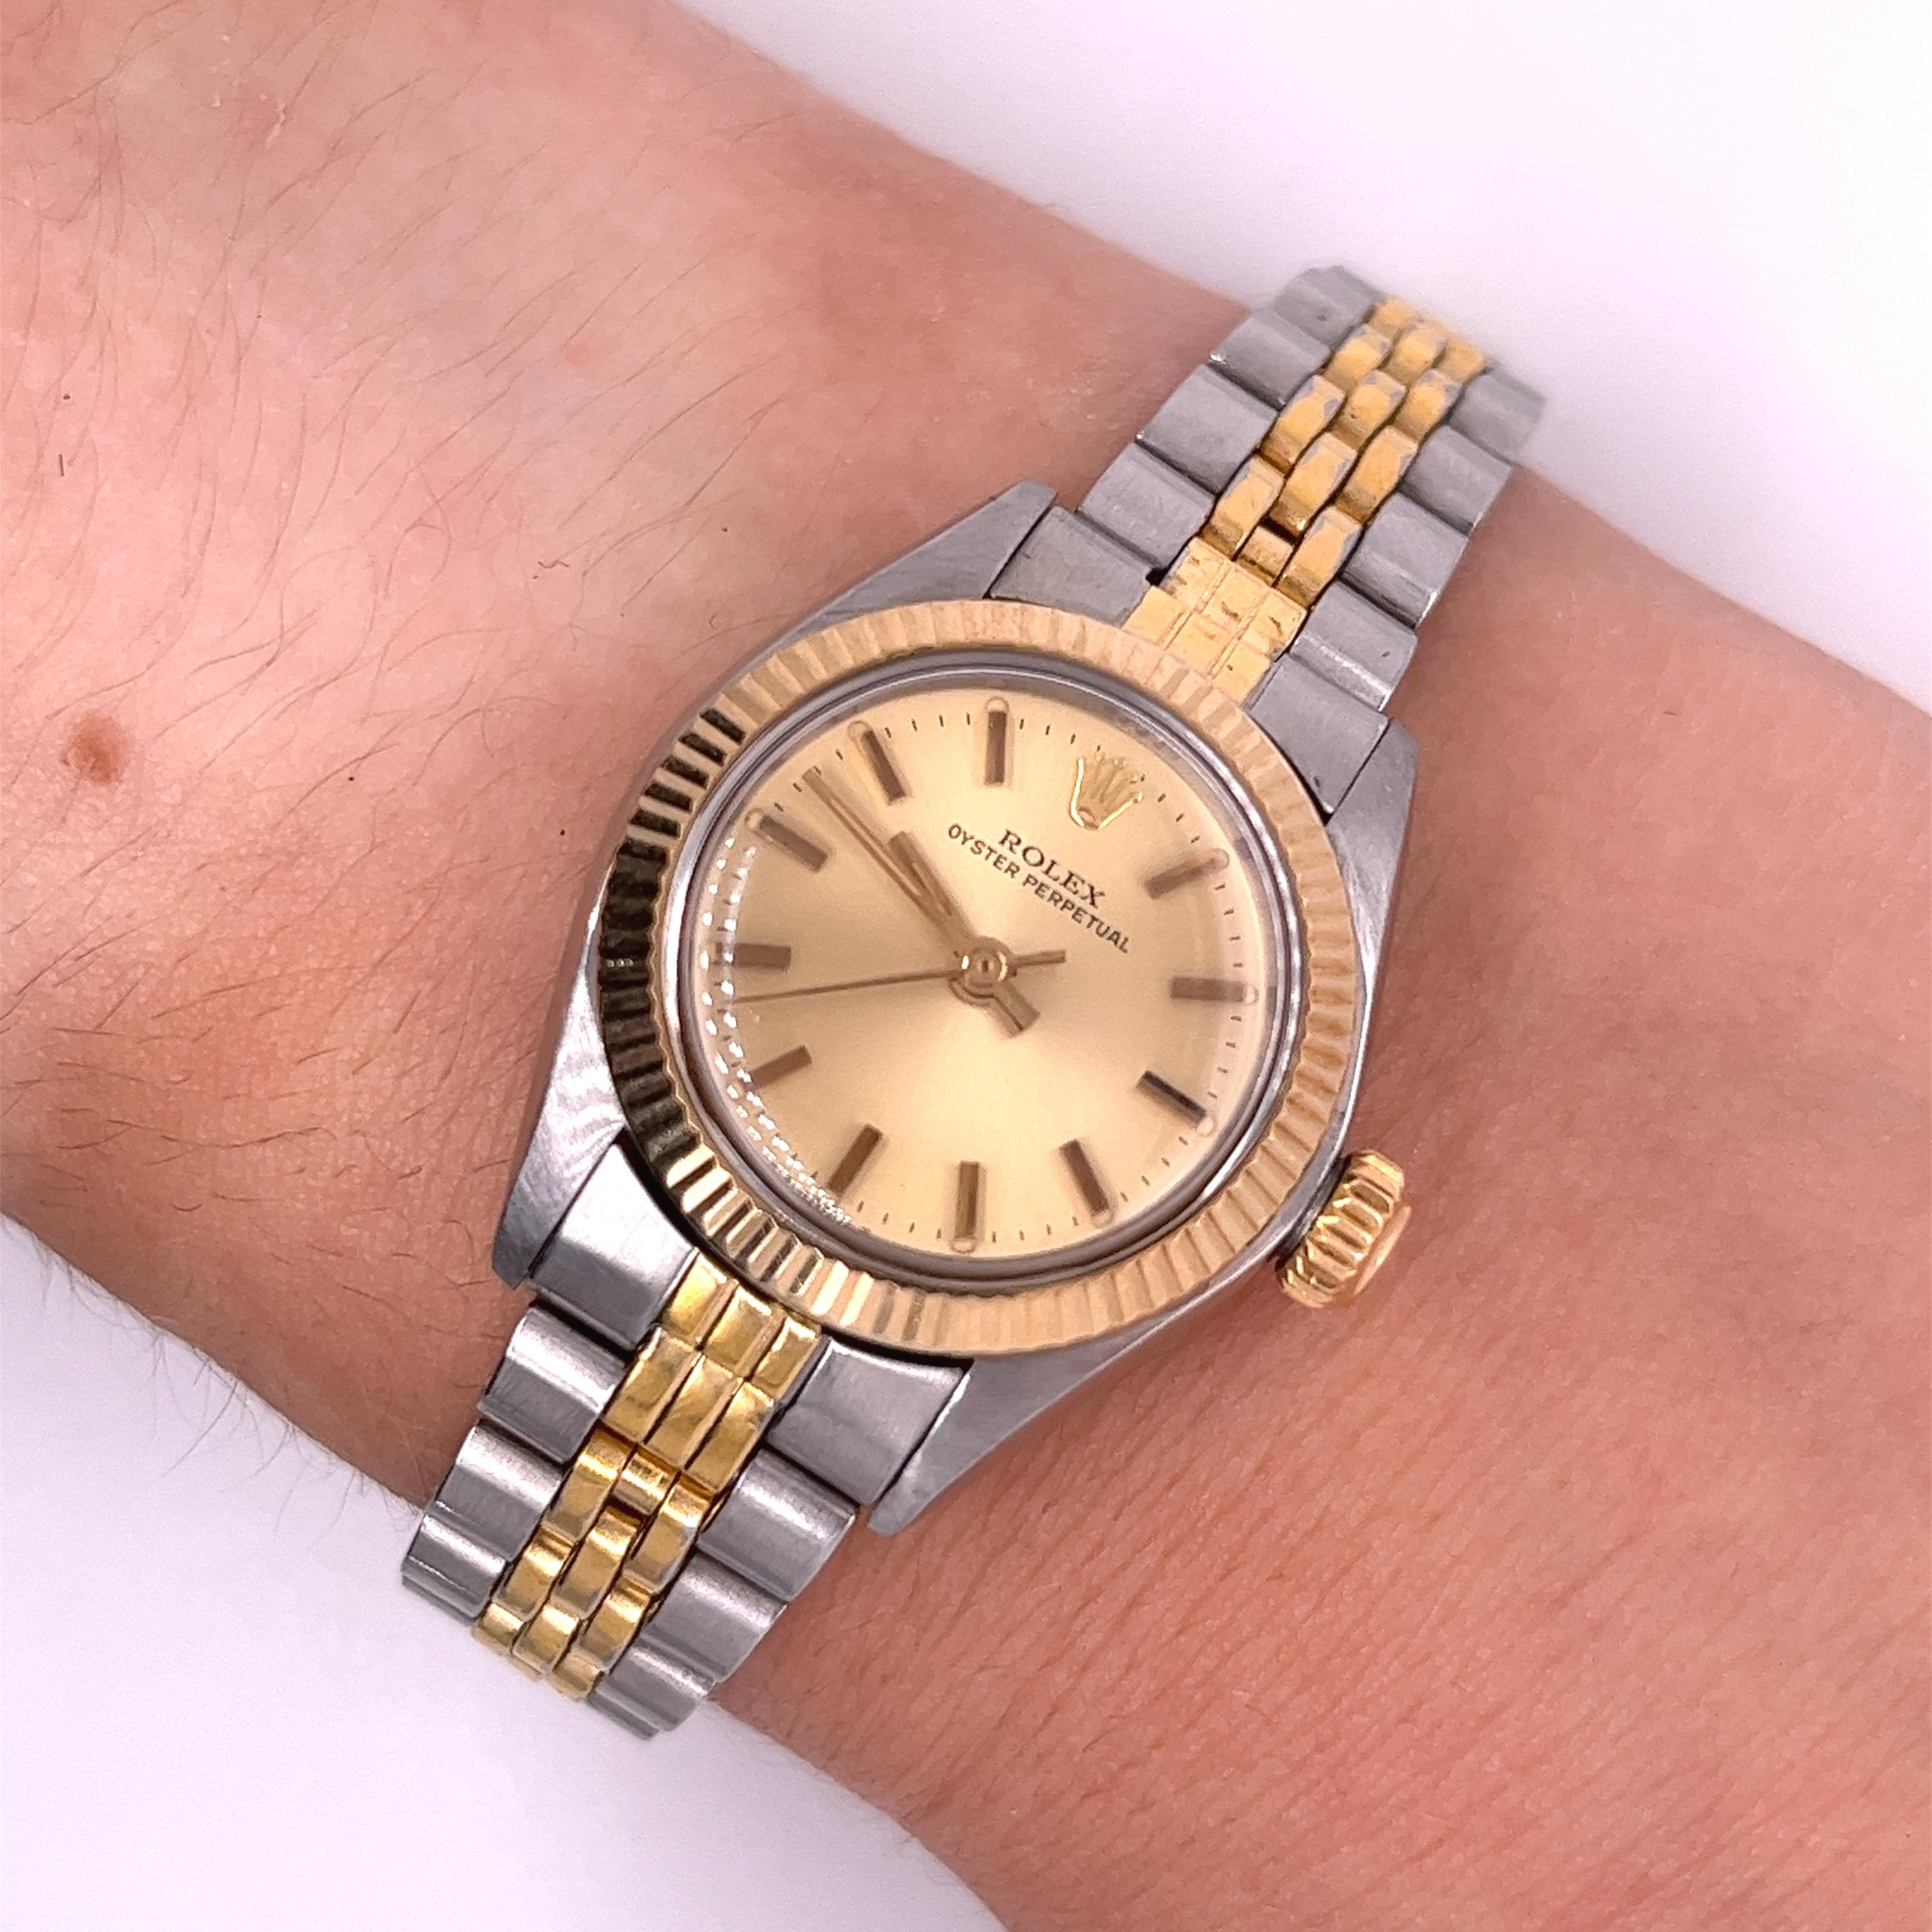 Two Tone Ladies Rolex Dial Oyster Perpetual Watch with Tudor Strap 1